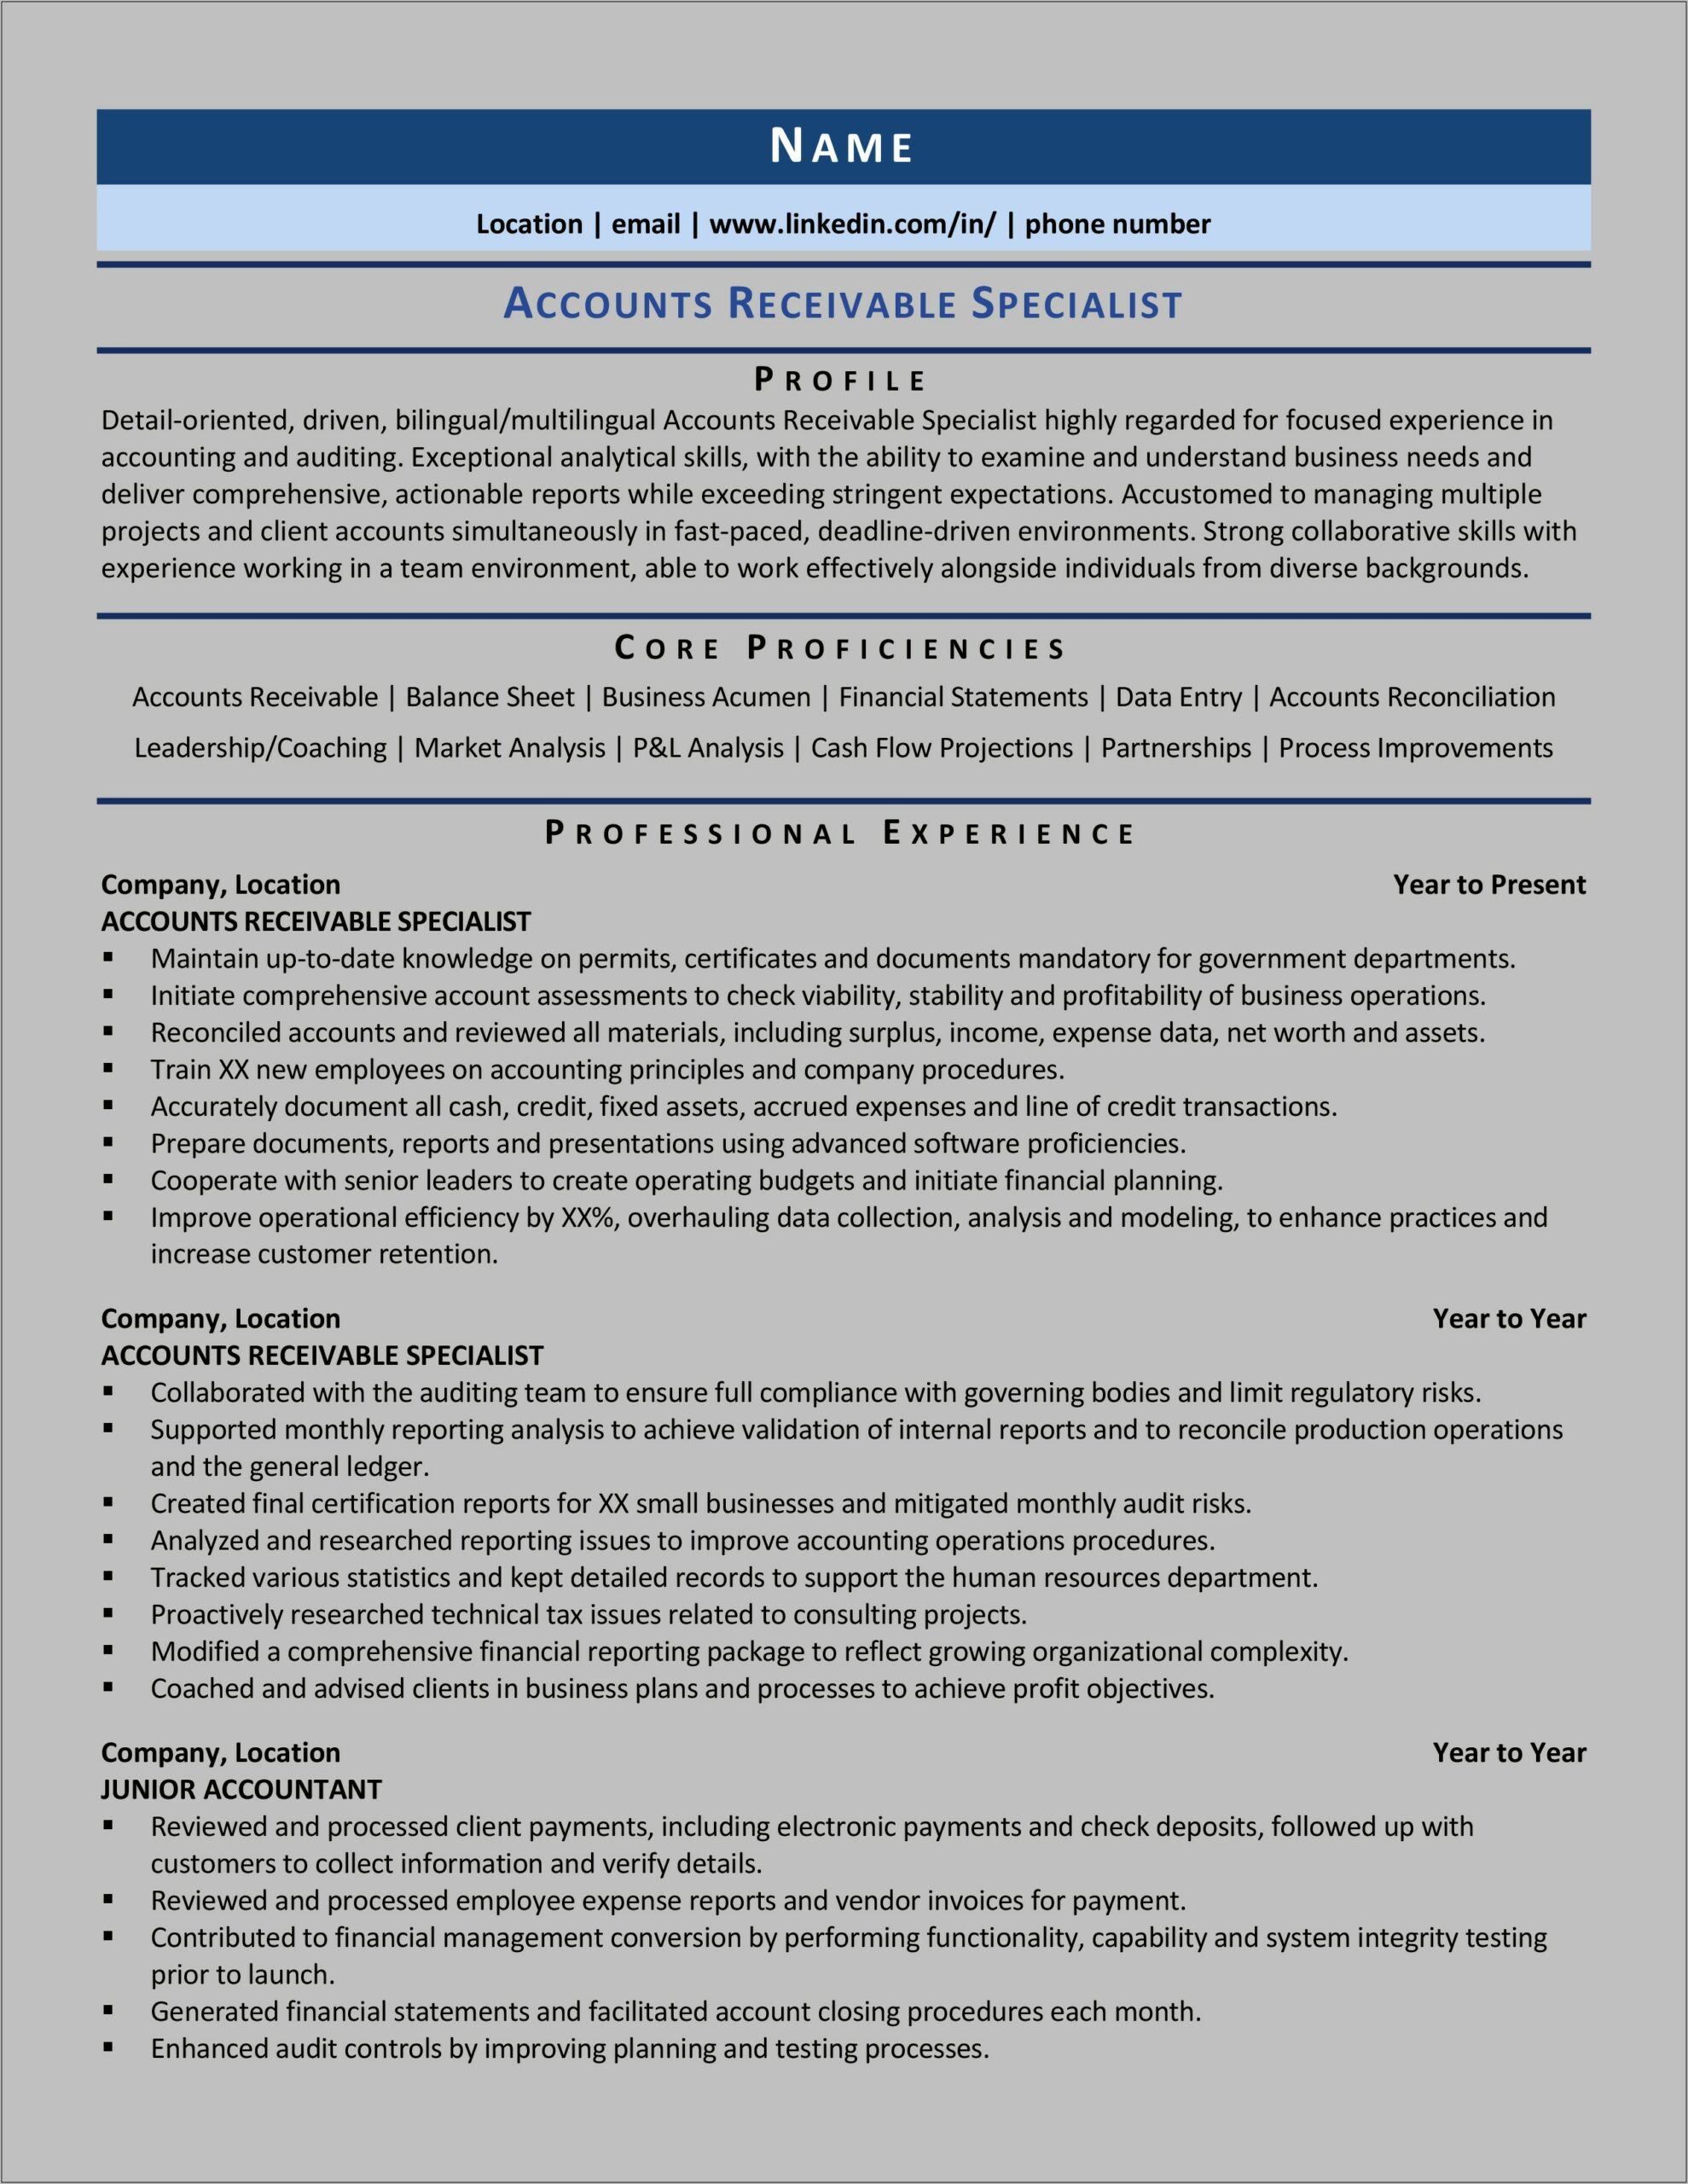 Accounting Specialist Skills For Resume